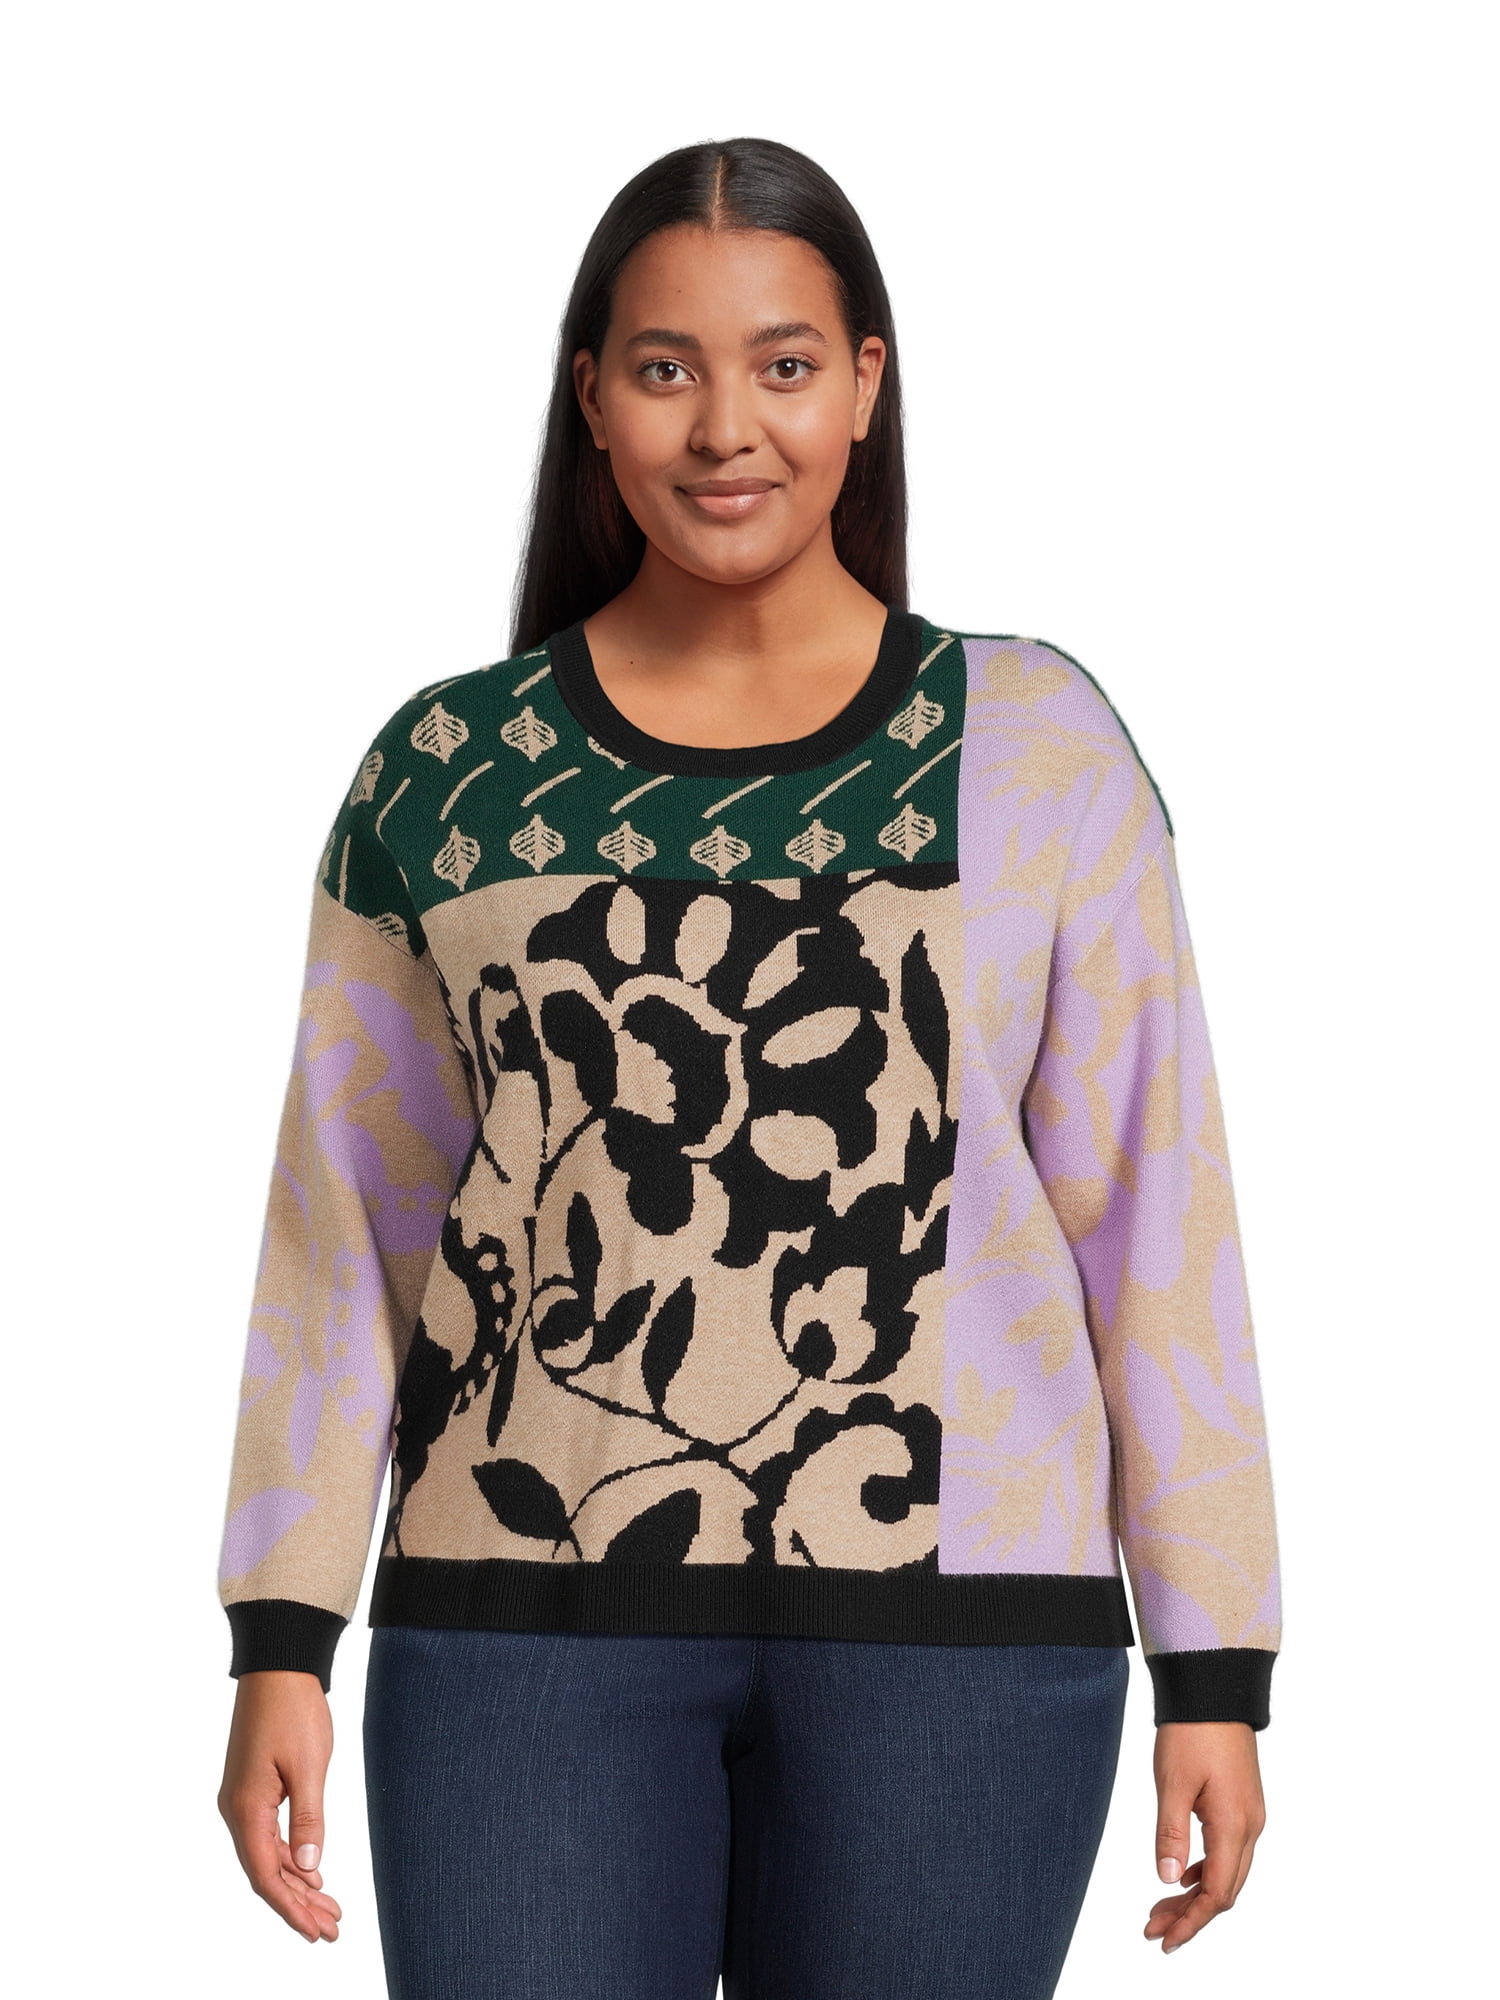 99 Jane Street Women's Plus Size Crewneck Pullover Sweater with Long Raglan  Sleeves, Midweight 